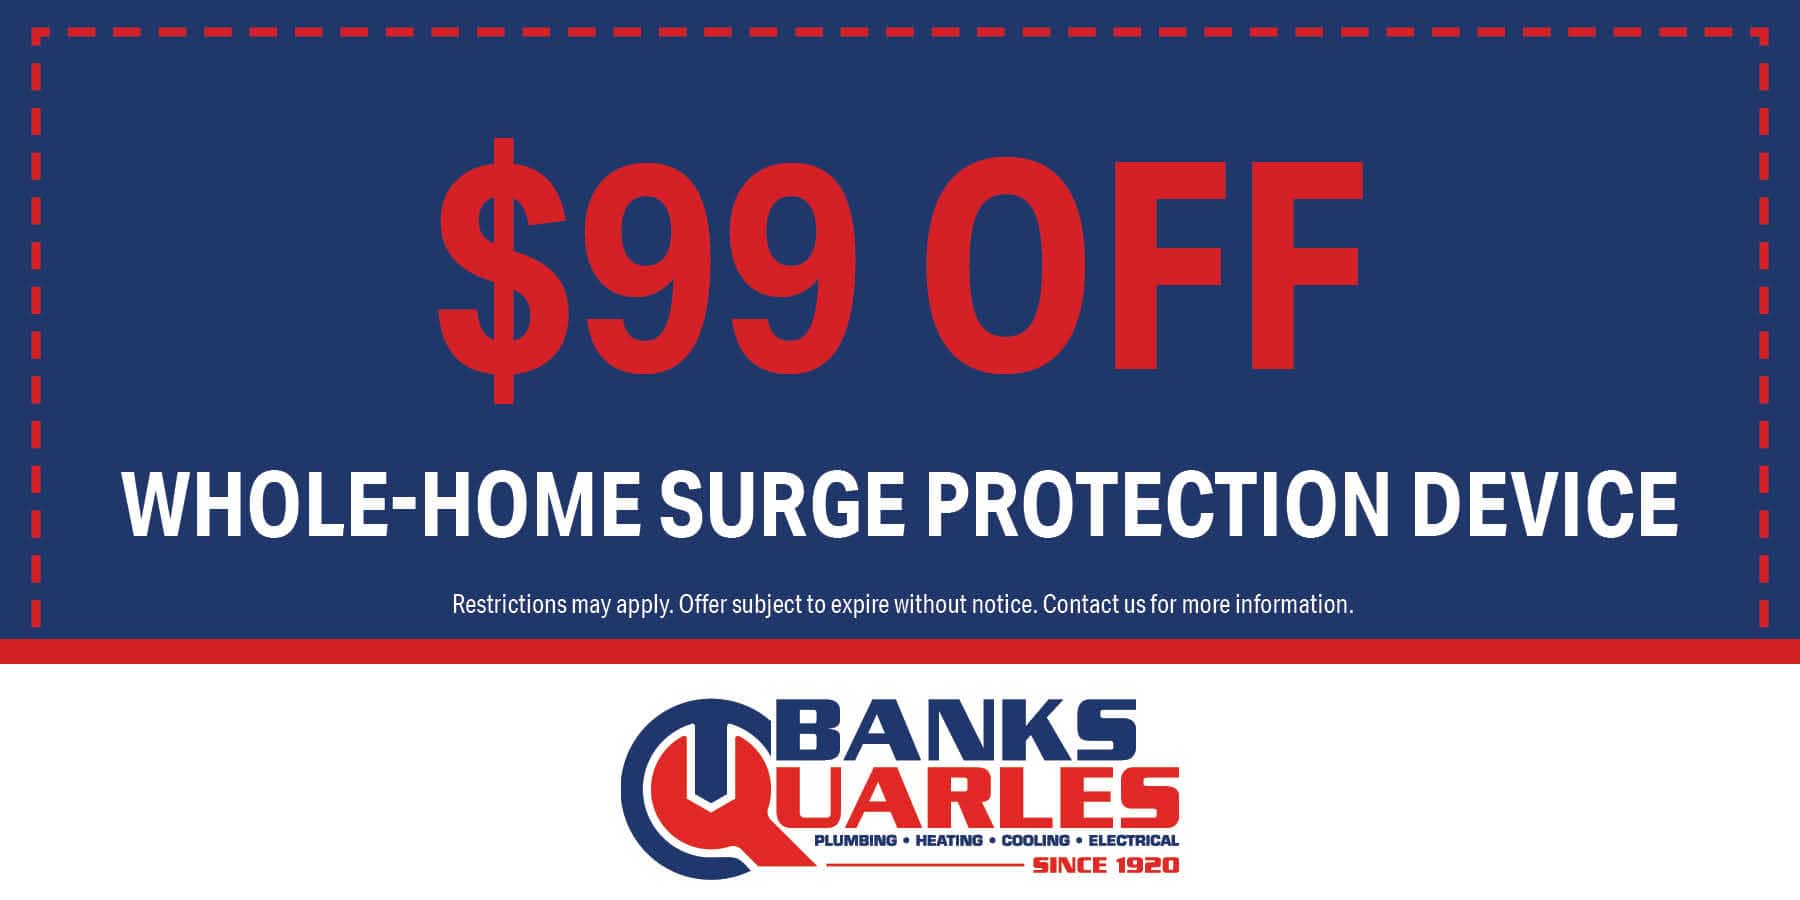 $99 off whole-home surge protection service. Offer subject to expire without warning. Contact us for details.